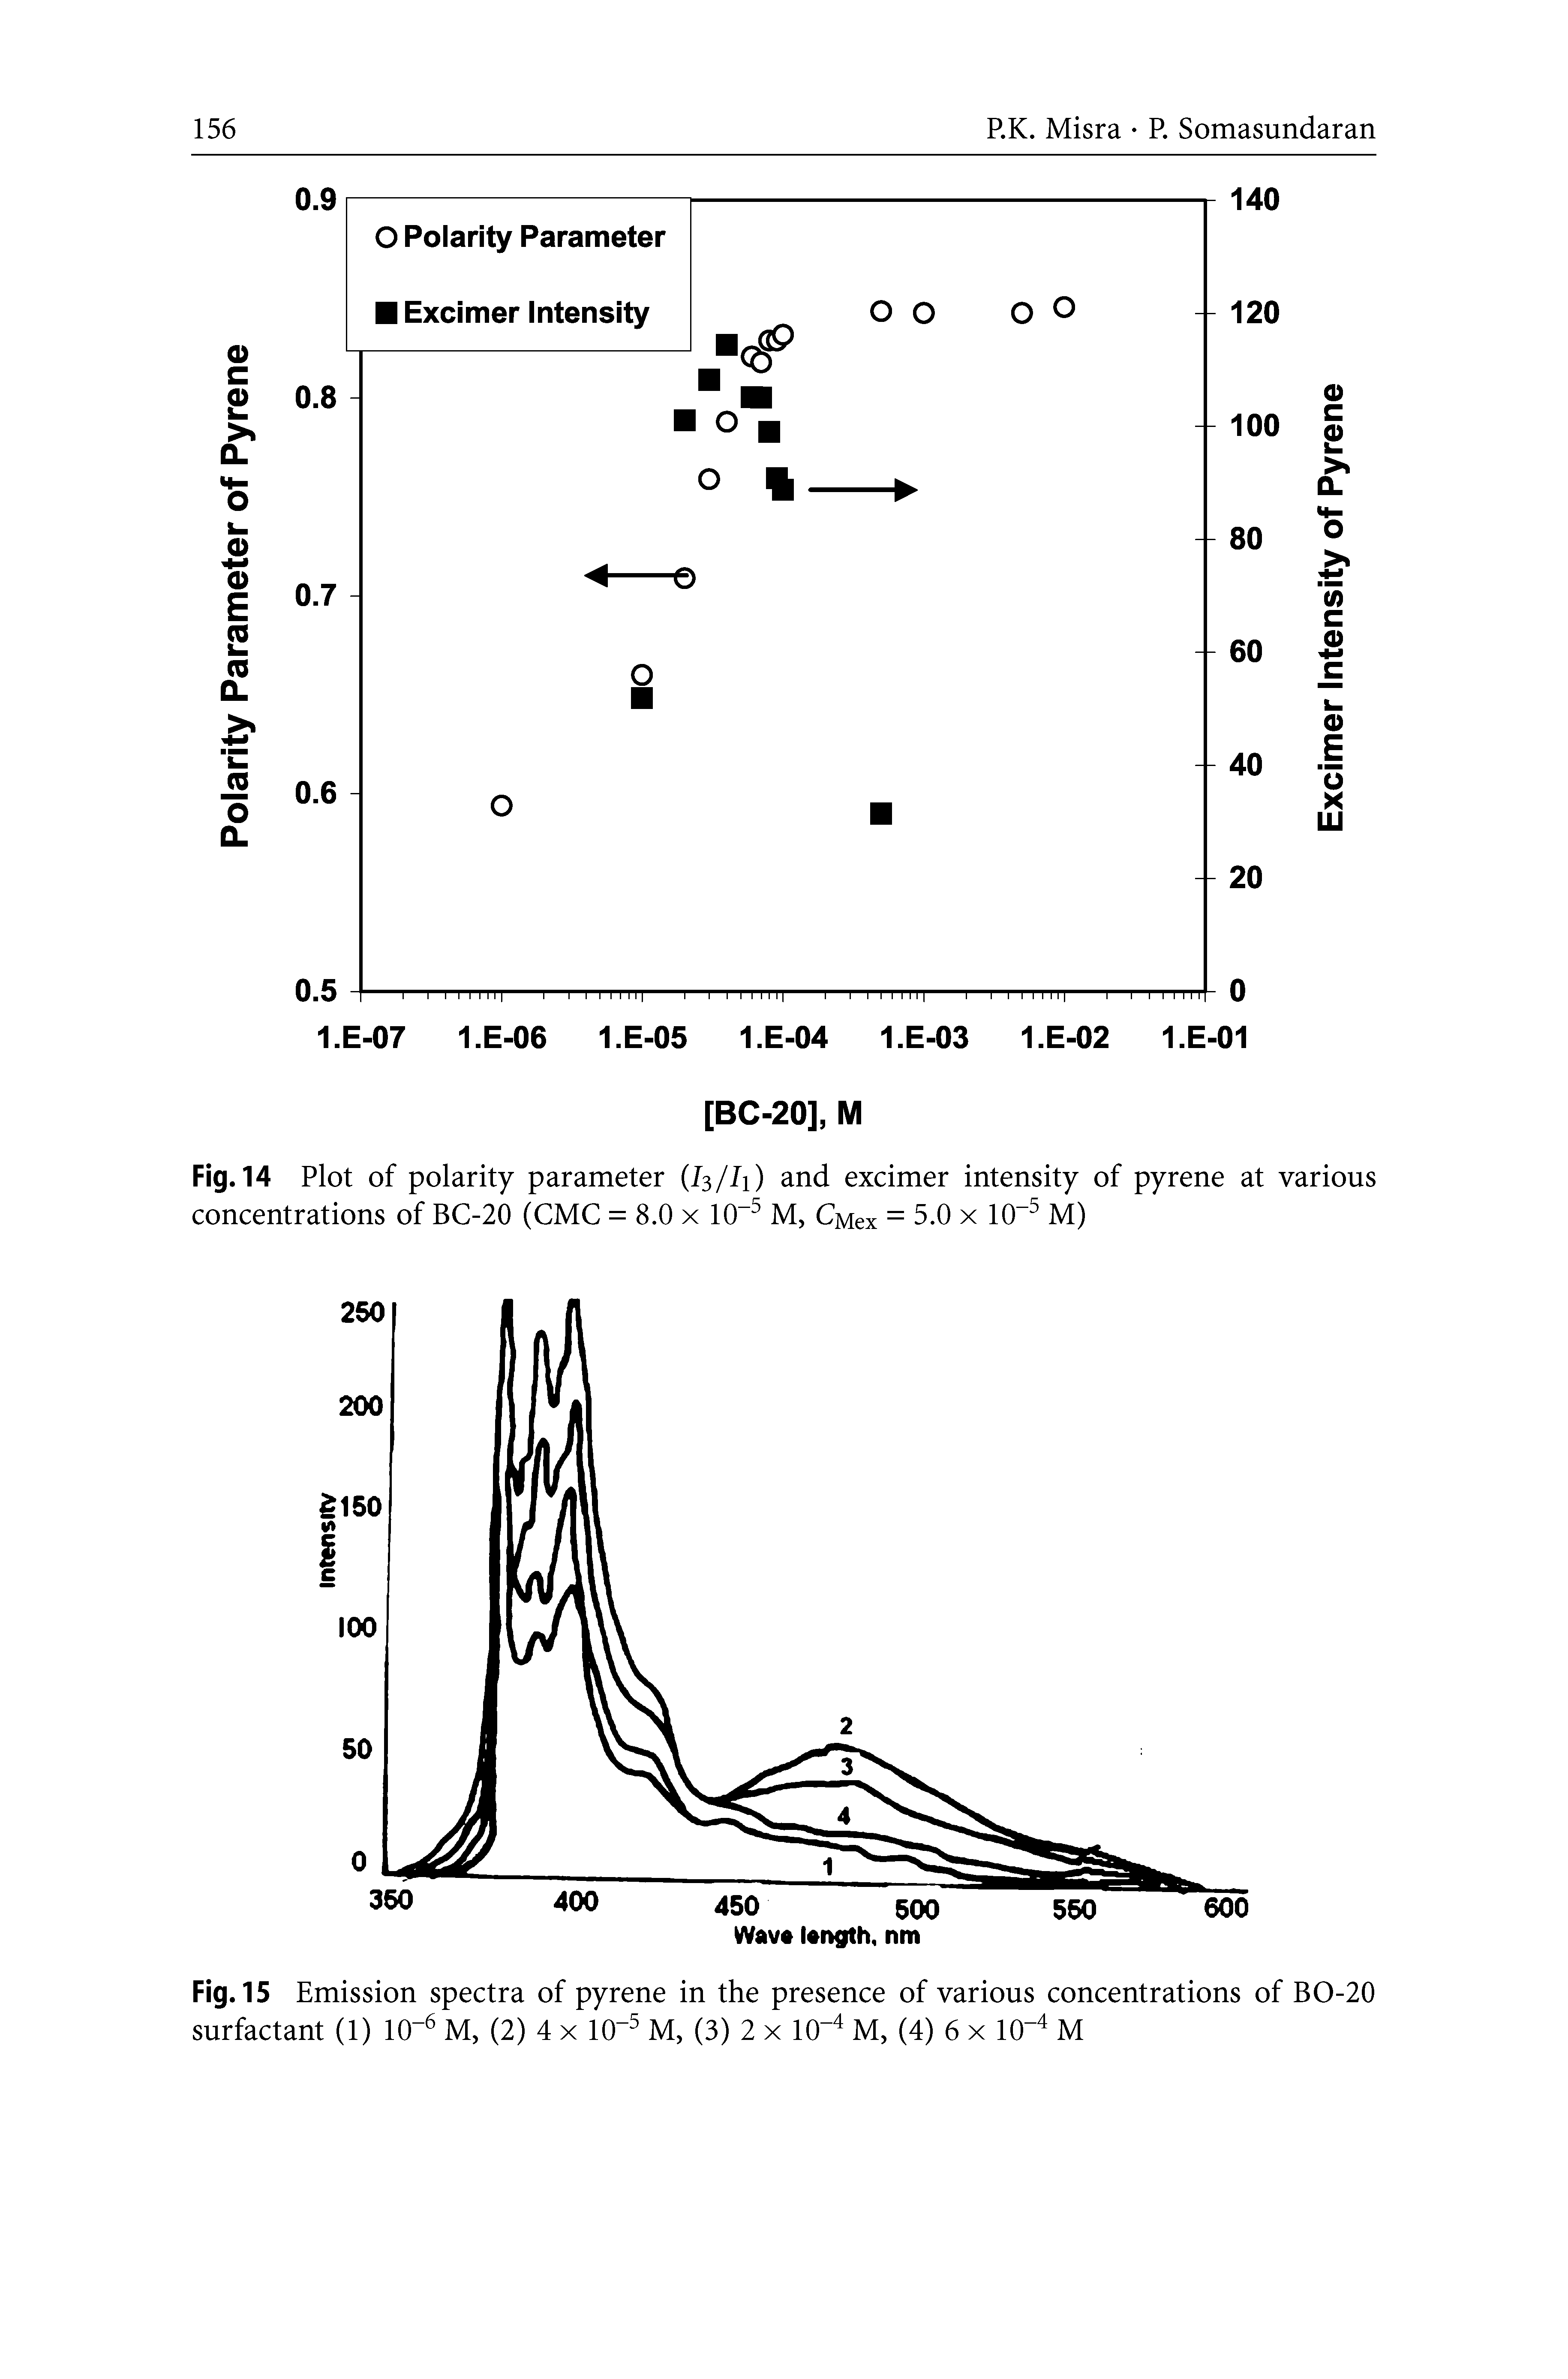 Fig. 14 Plot of polarity parameter (h/h) and excimer intensity of pyrene at various concentrations of BC-20 (CMC = 8.0 x 10 M, Cjviex = 5.0 x 10 M)...